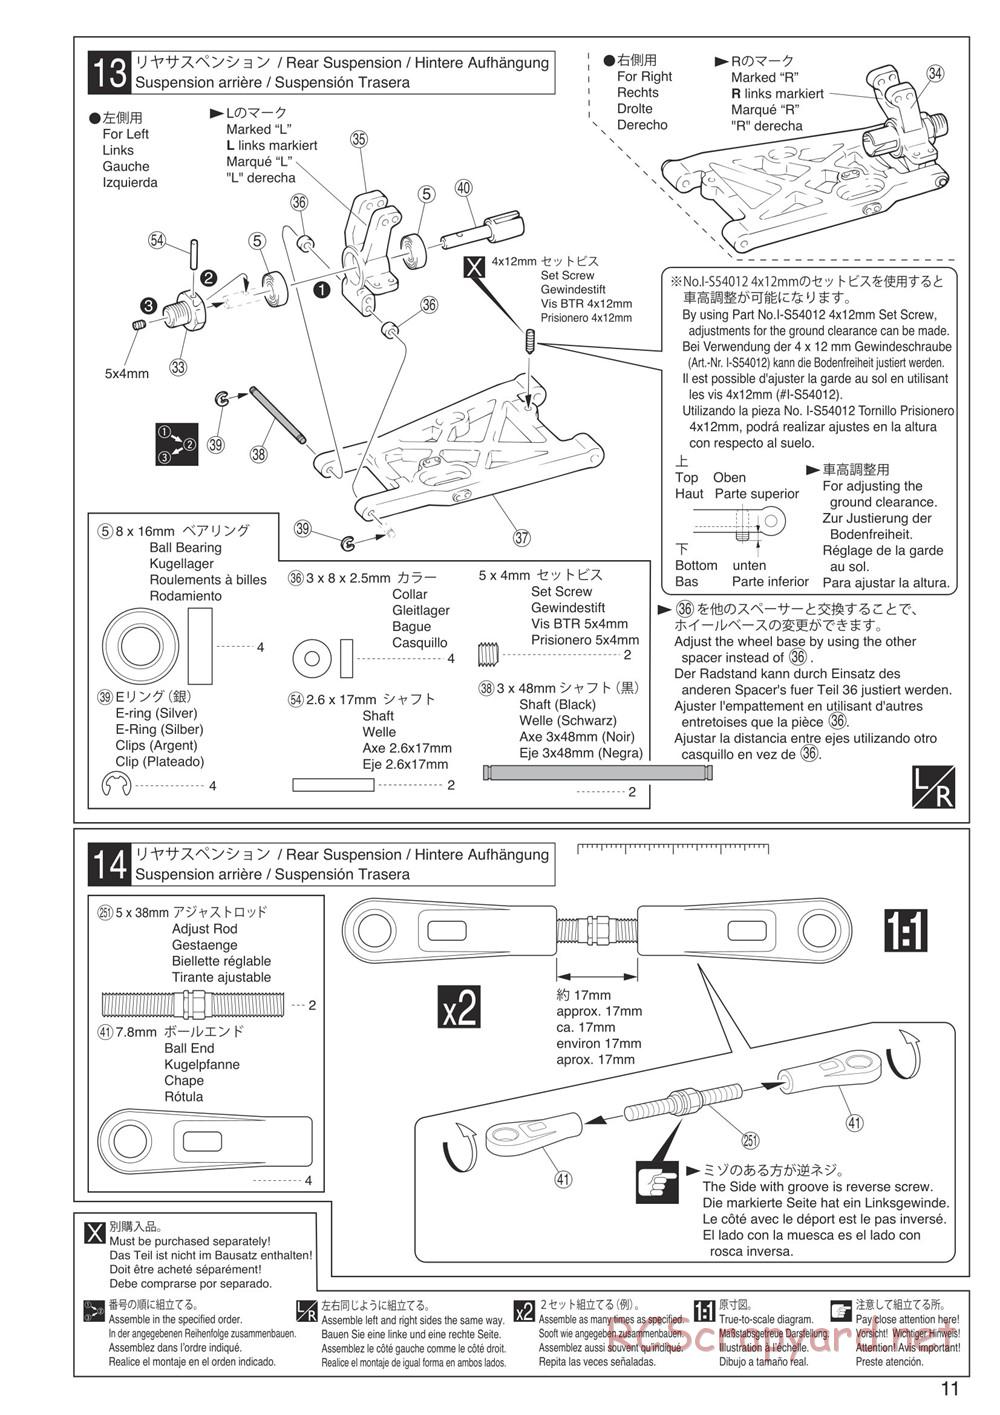 Kyosho - Inferno Neo - Manual - Page 11